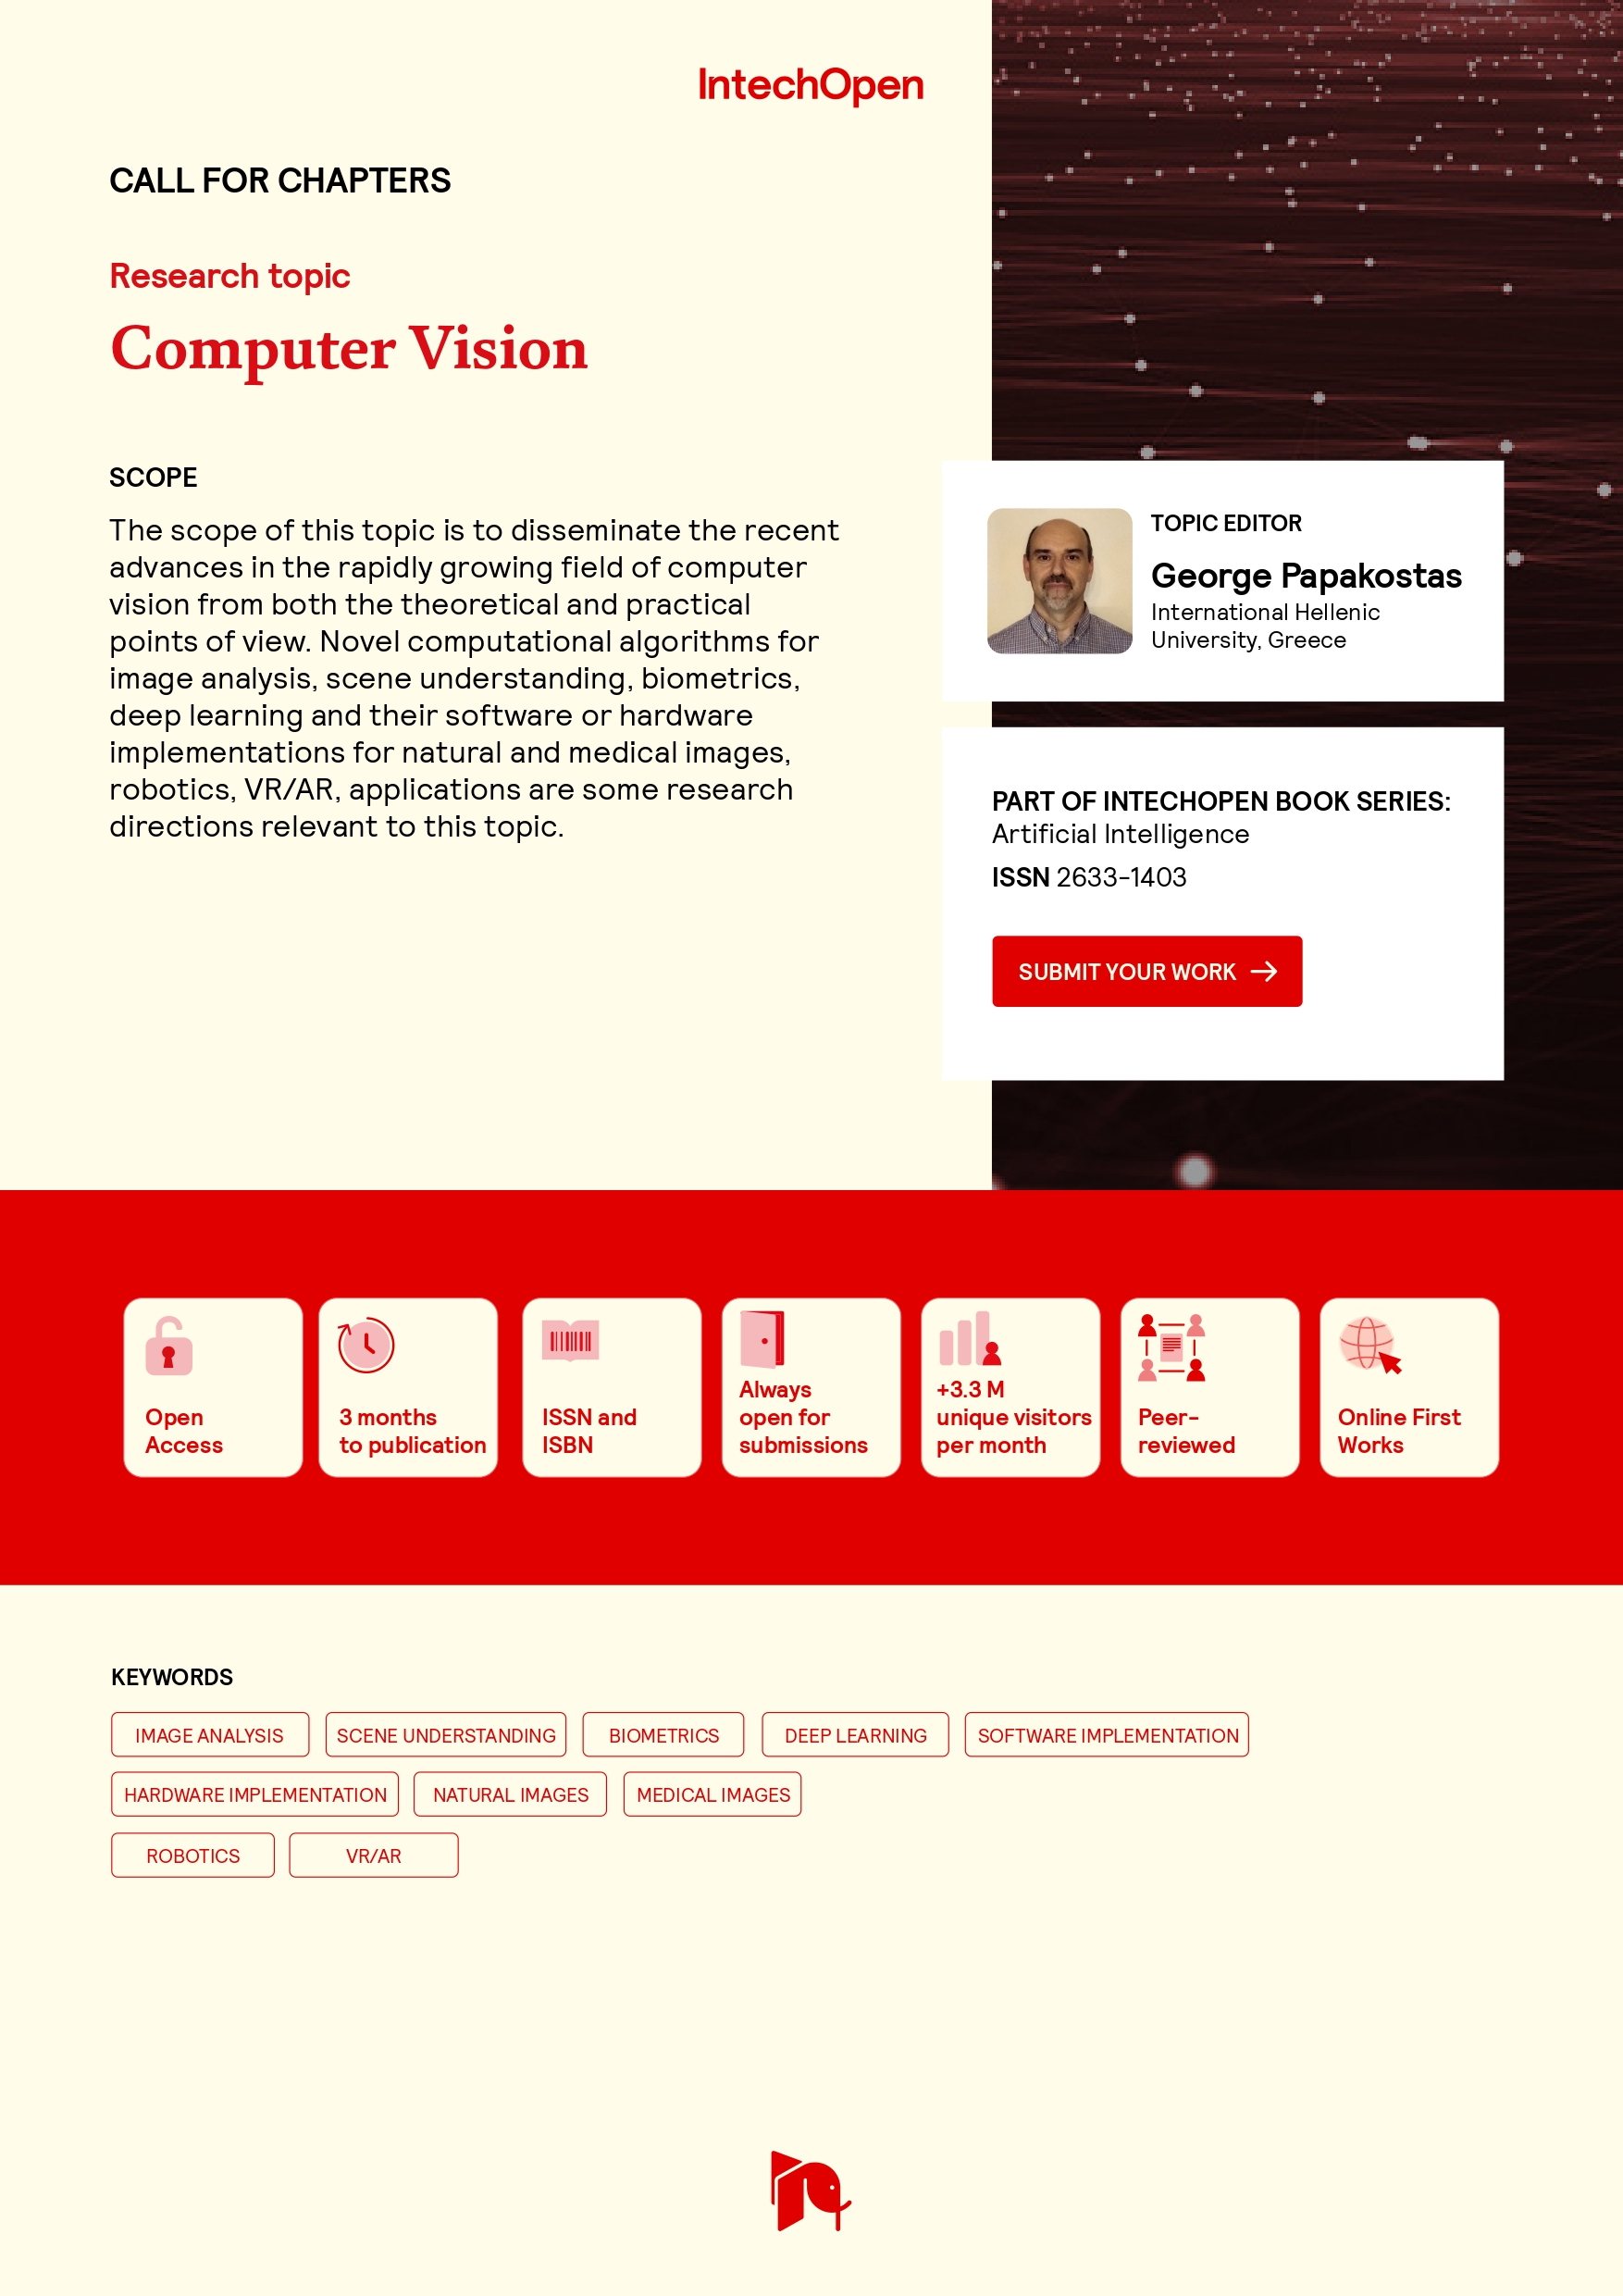 Call for Chapters (Computer Vision)_1